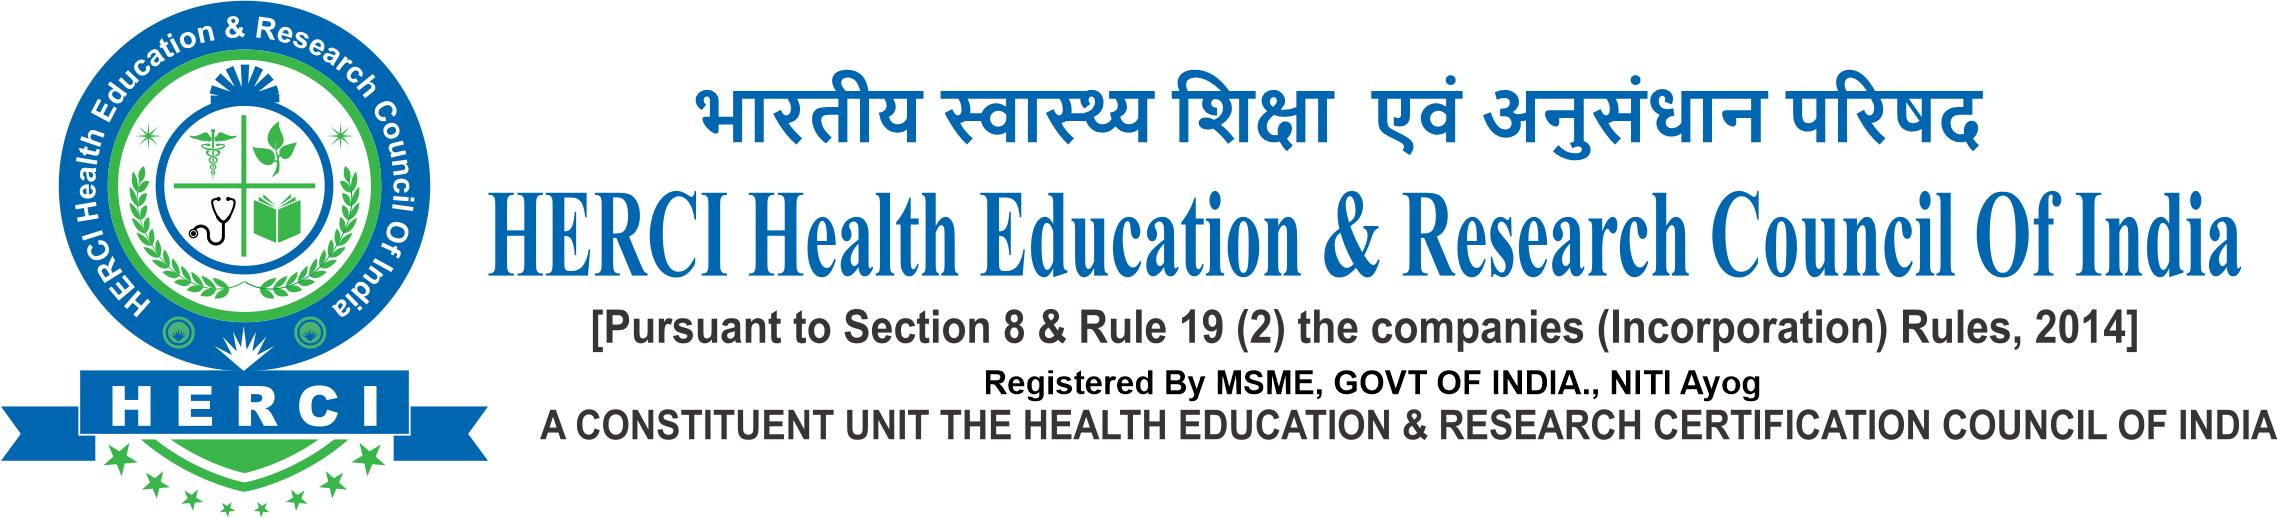 health education research council of india